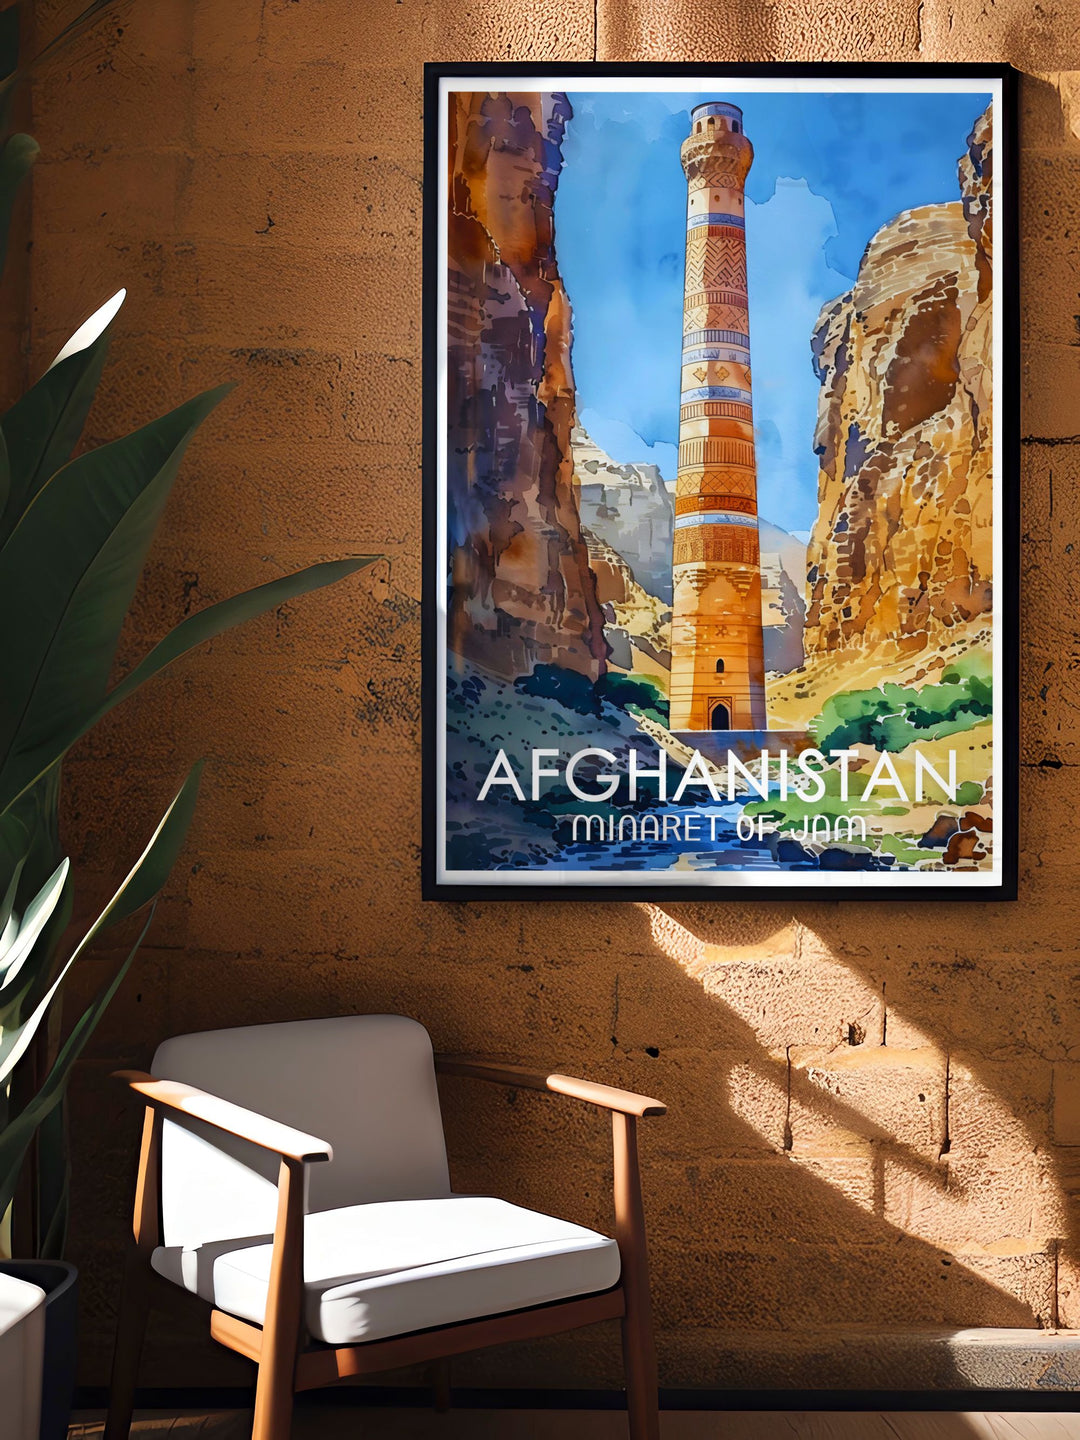 Beautiful Minaret of Jam wall art depicting the iconic minaret a meaningful addition to your art collection that celebrates Afghanistans rich cultural heritage